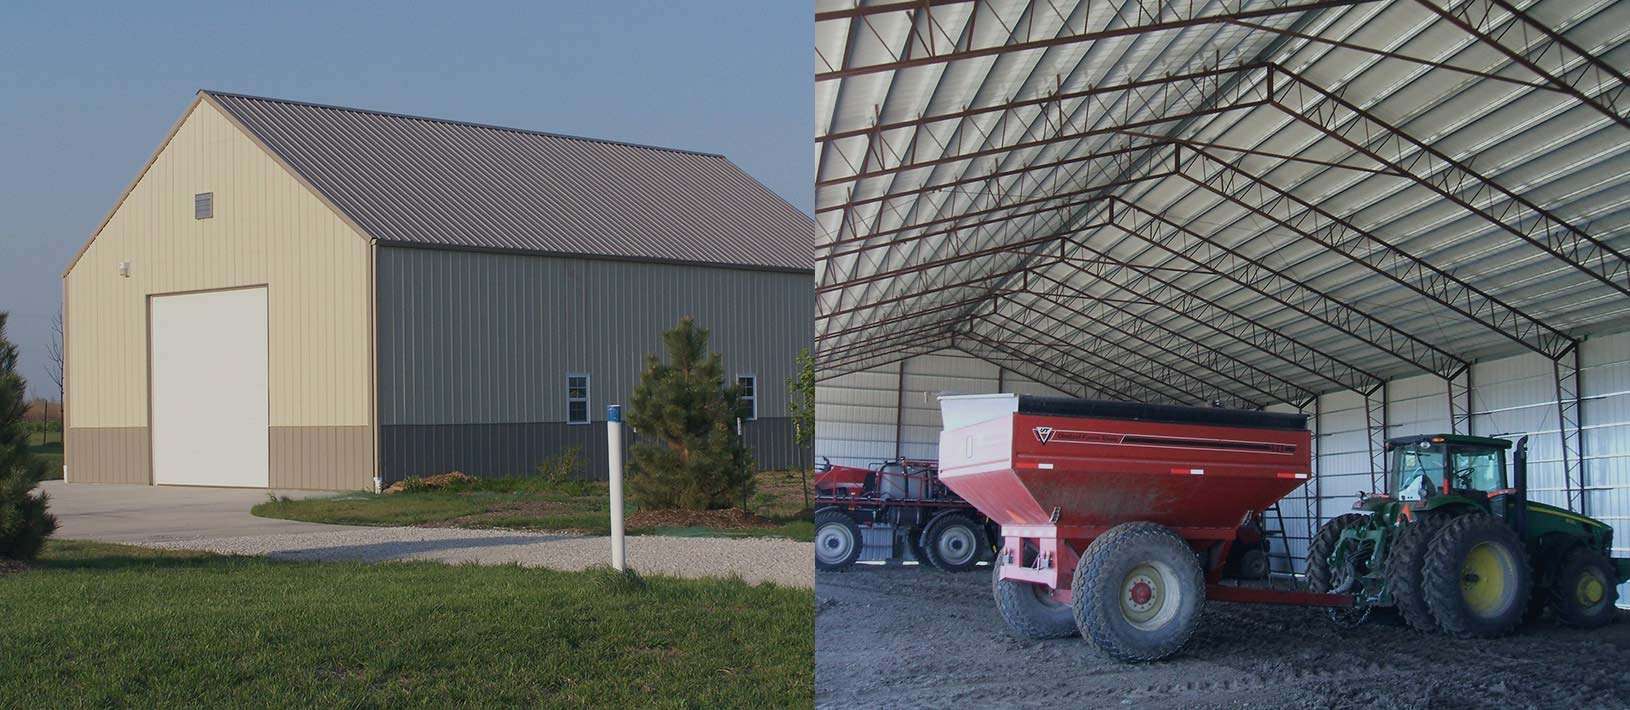 Innovative Uses of Metal Buildings in Agriculture